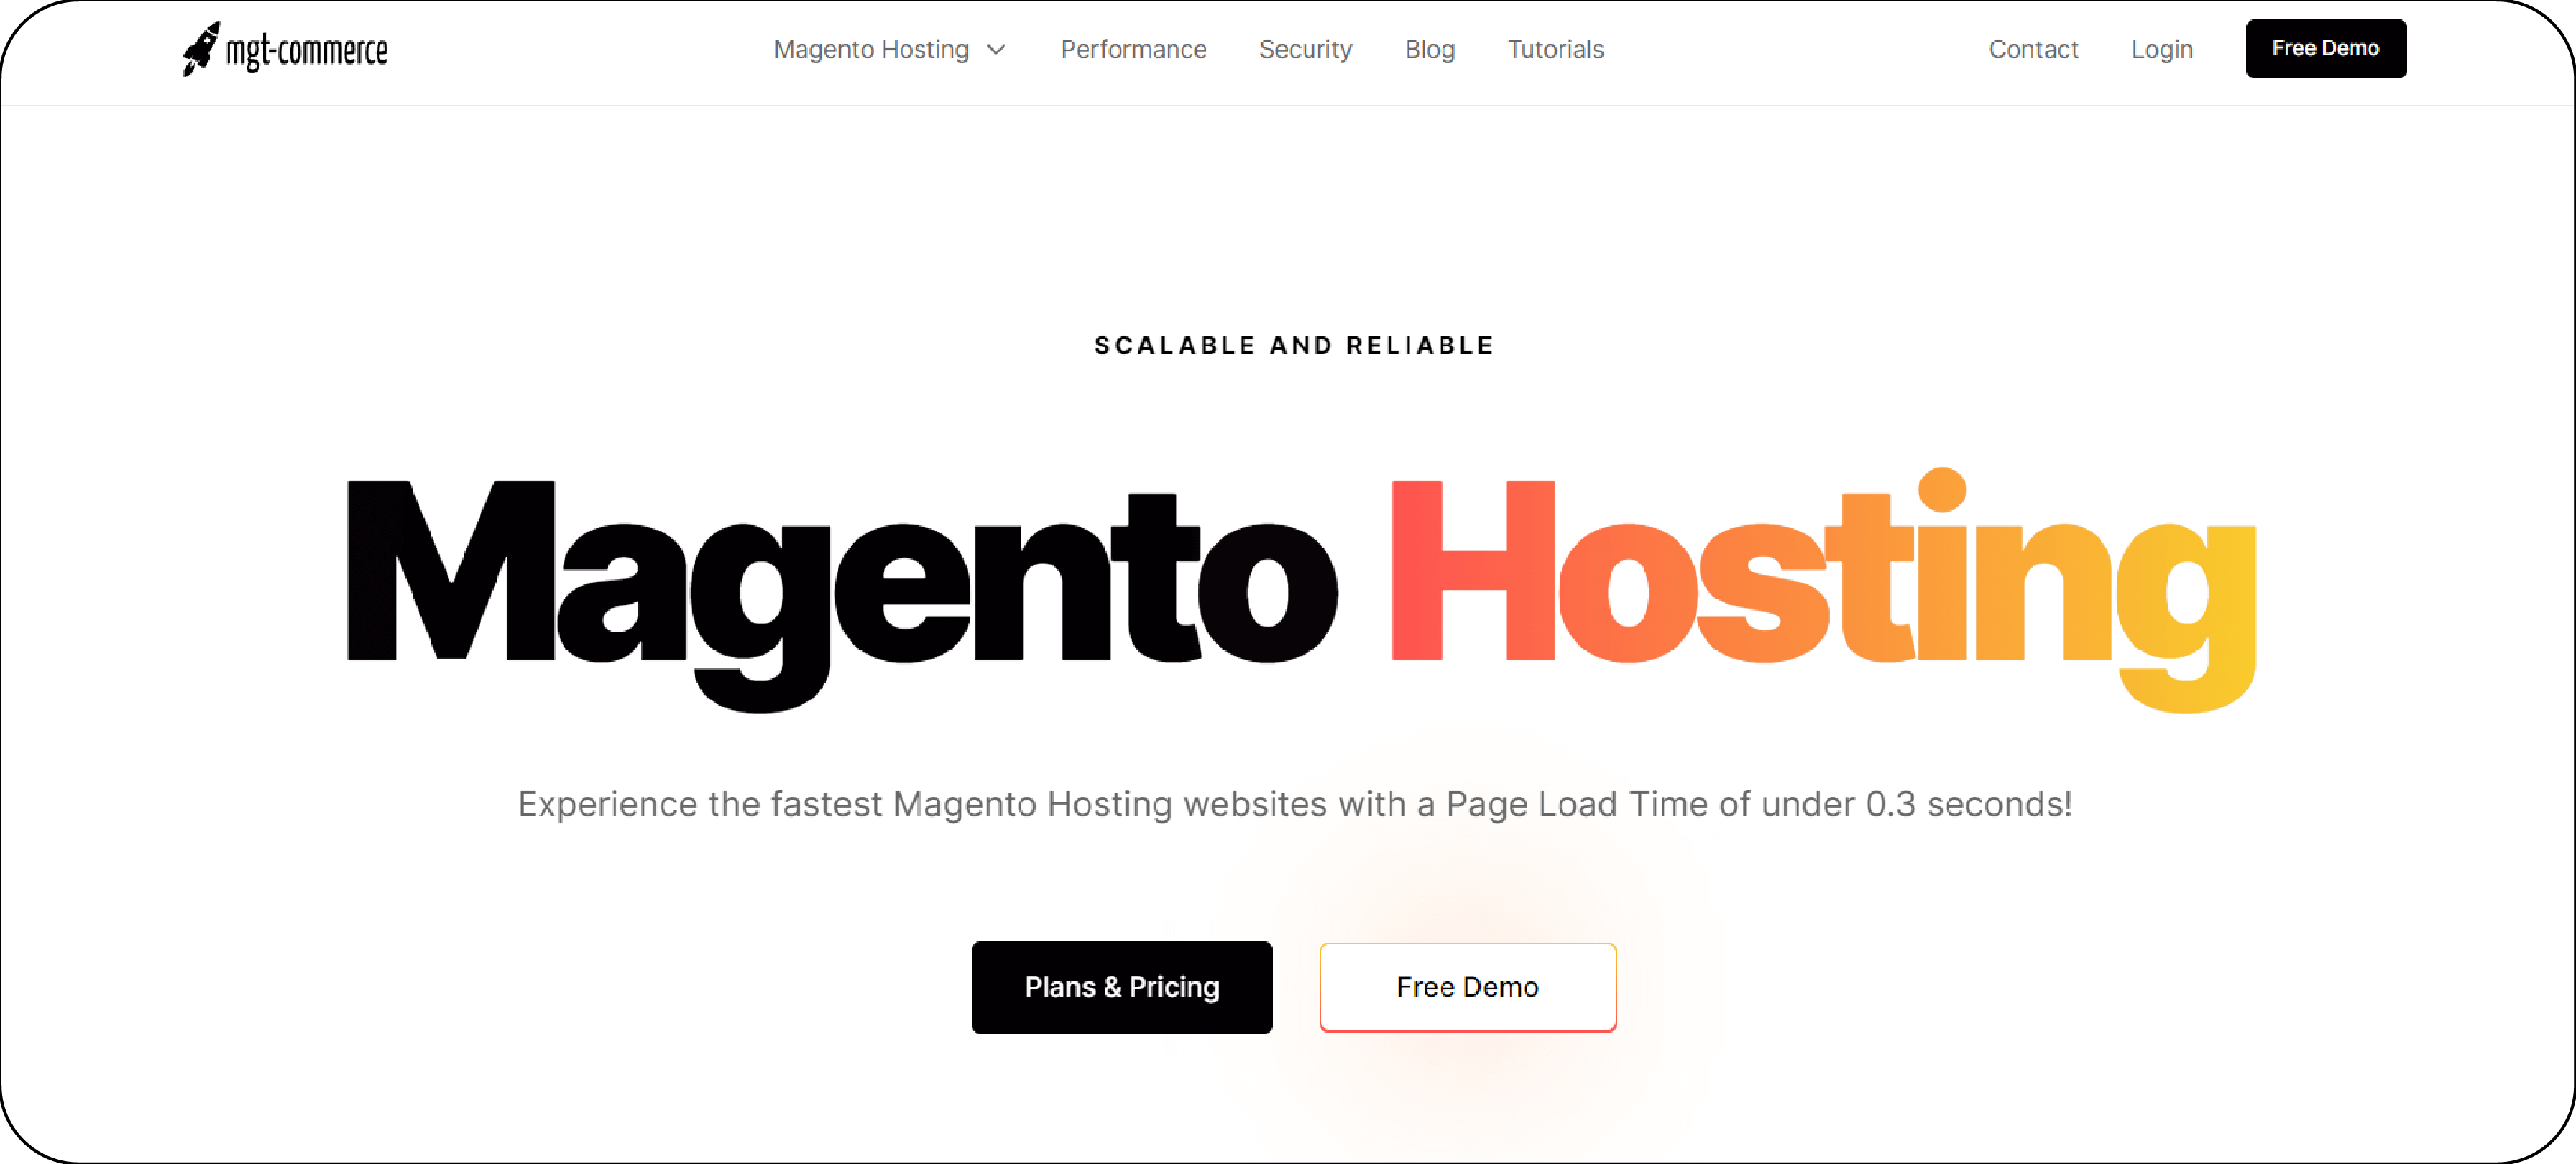 Best magento hosting service MGT-Commerce